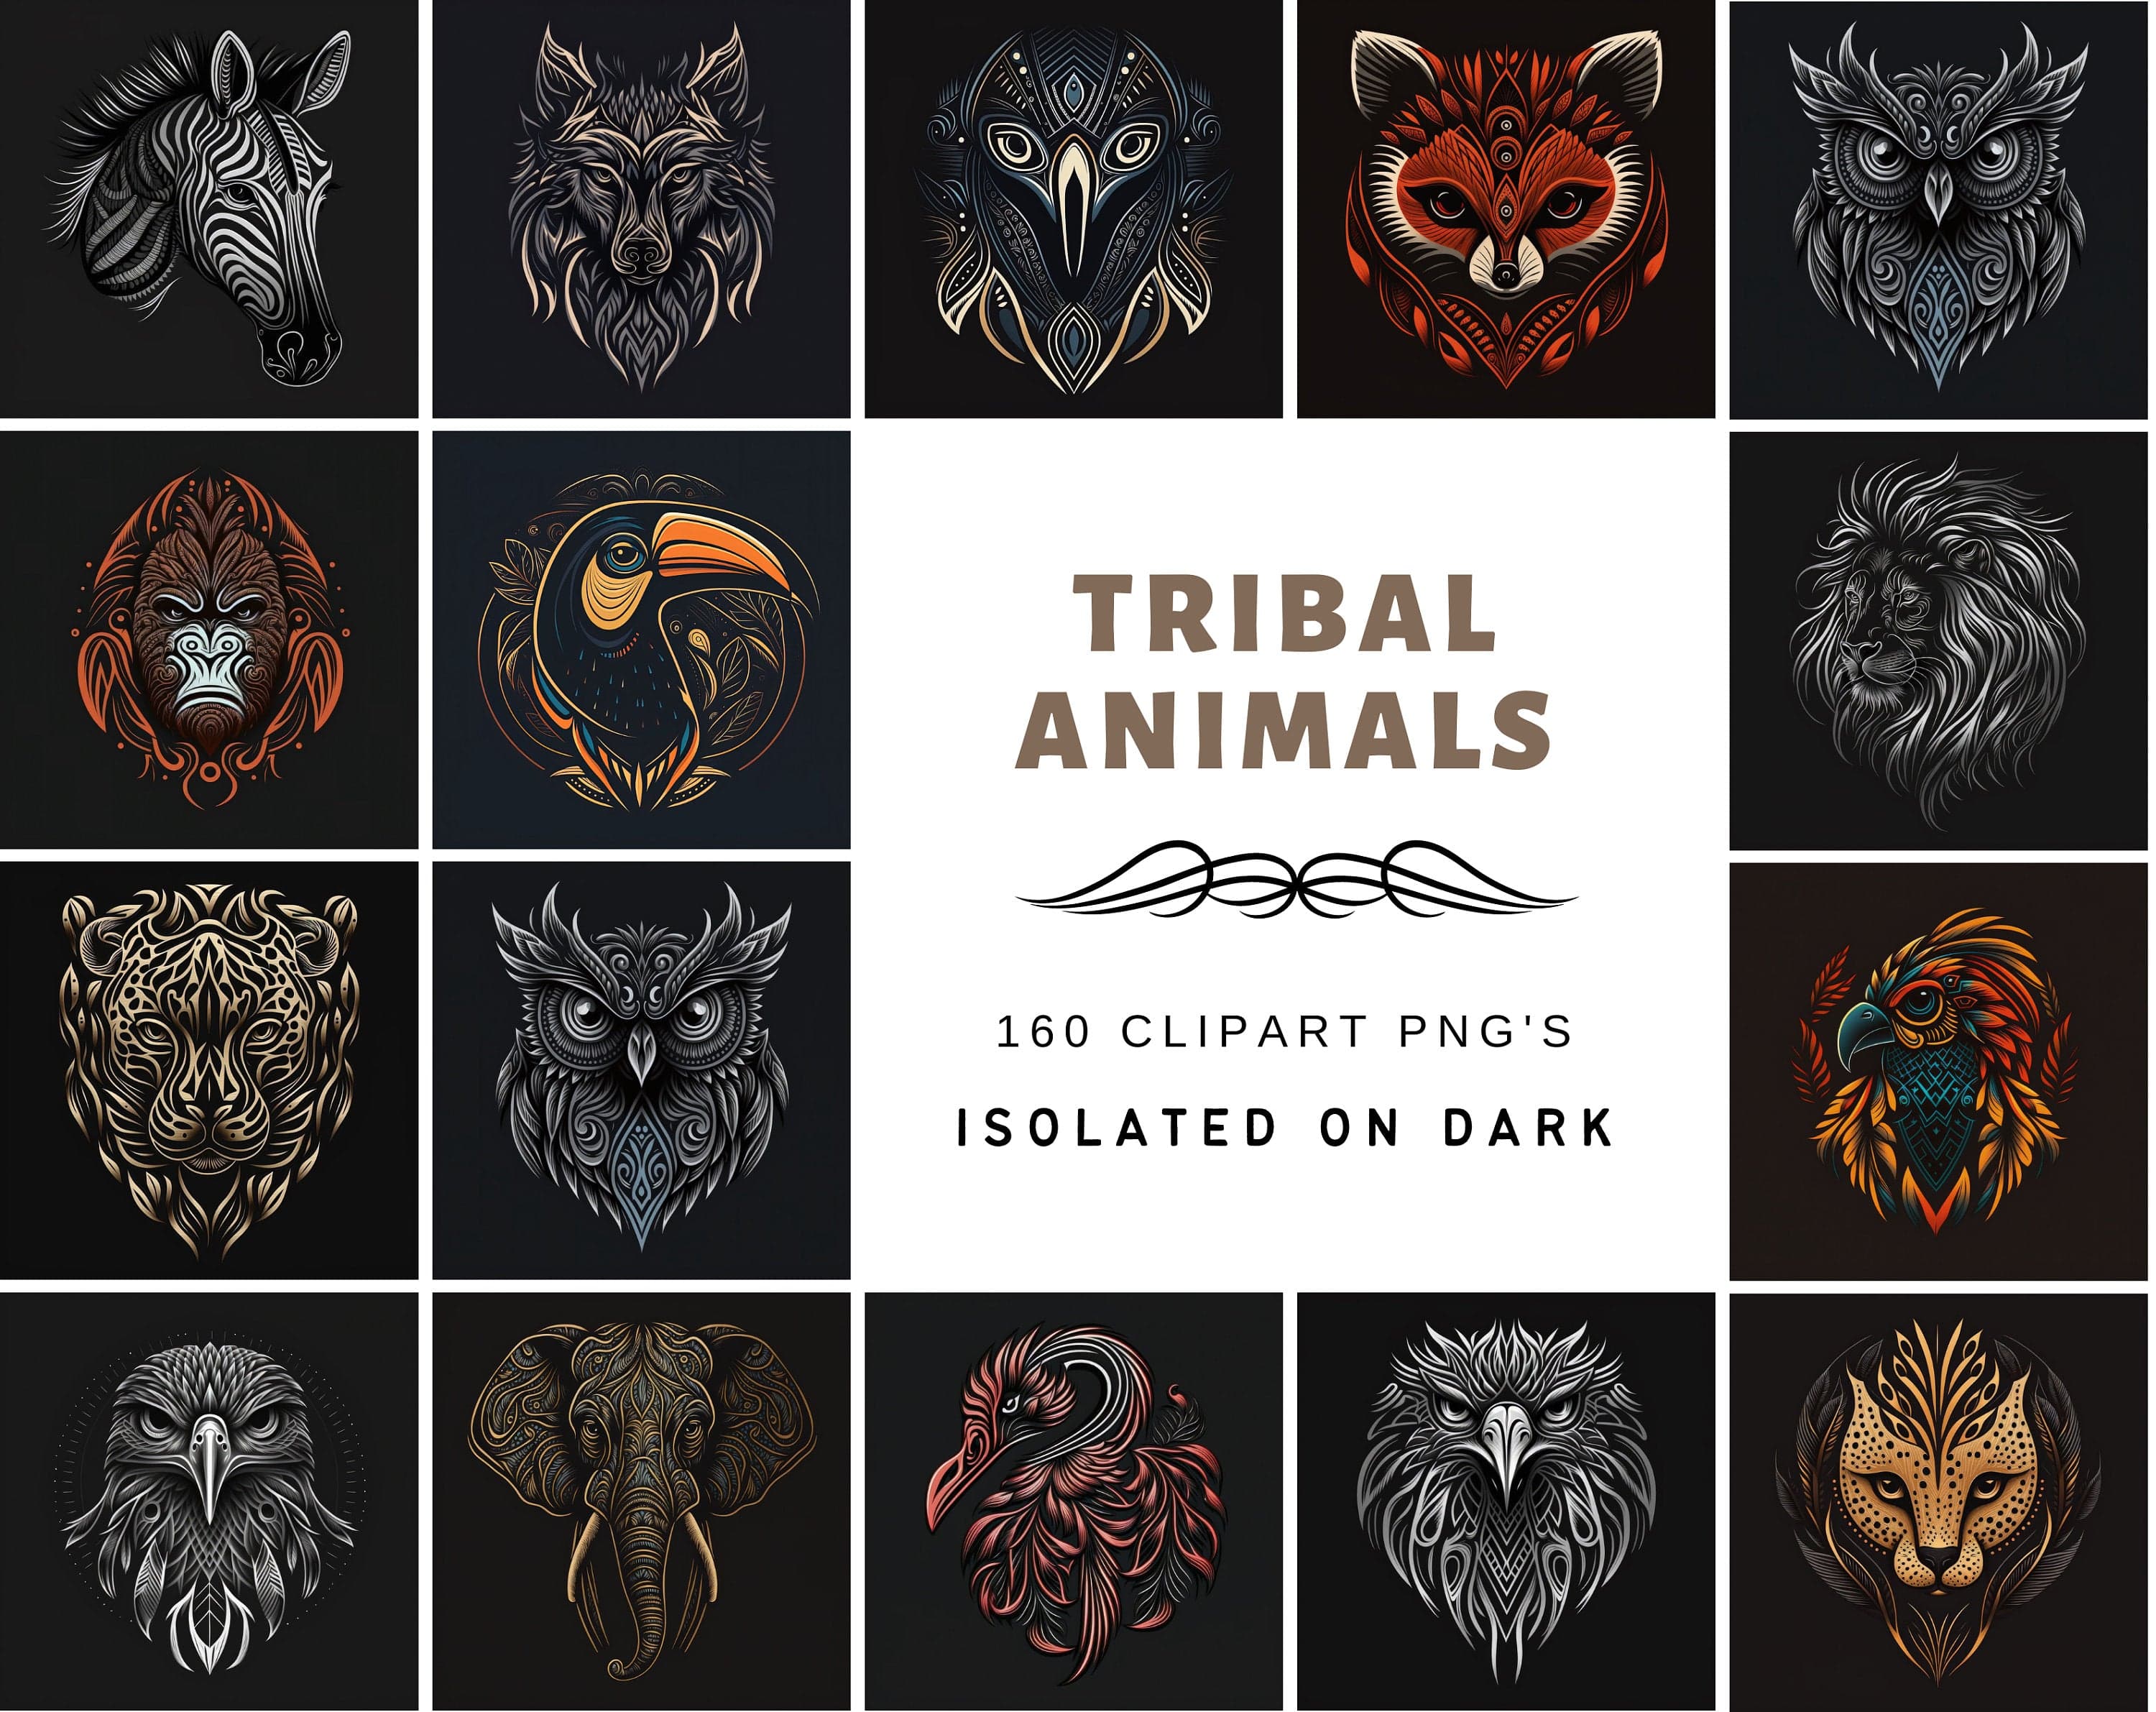 Bundle of 160 Tribal Animal Images in High Resolution PNG Format,Instant Digital Download for Scrapbooking, DIY Projects, and Commercial Use Digital Download Sumobundle